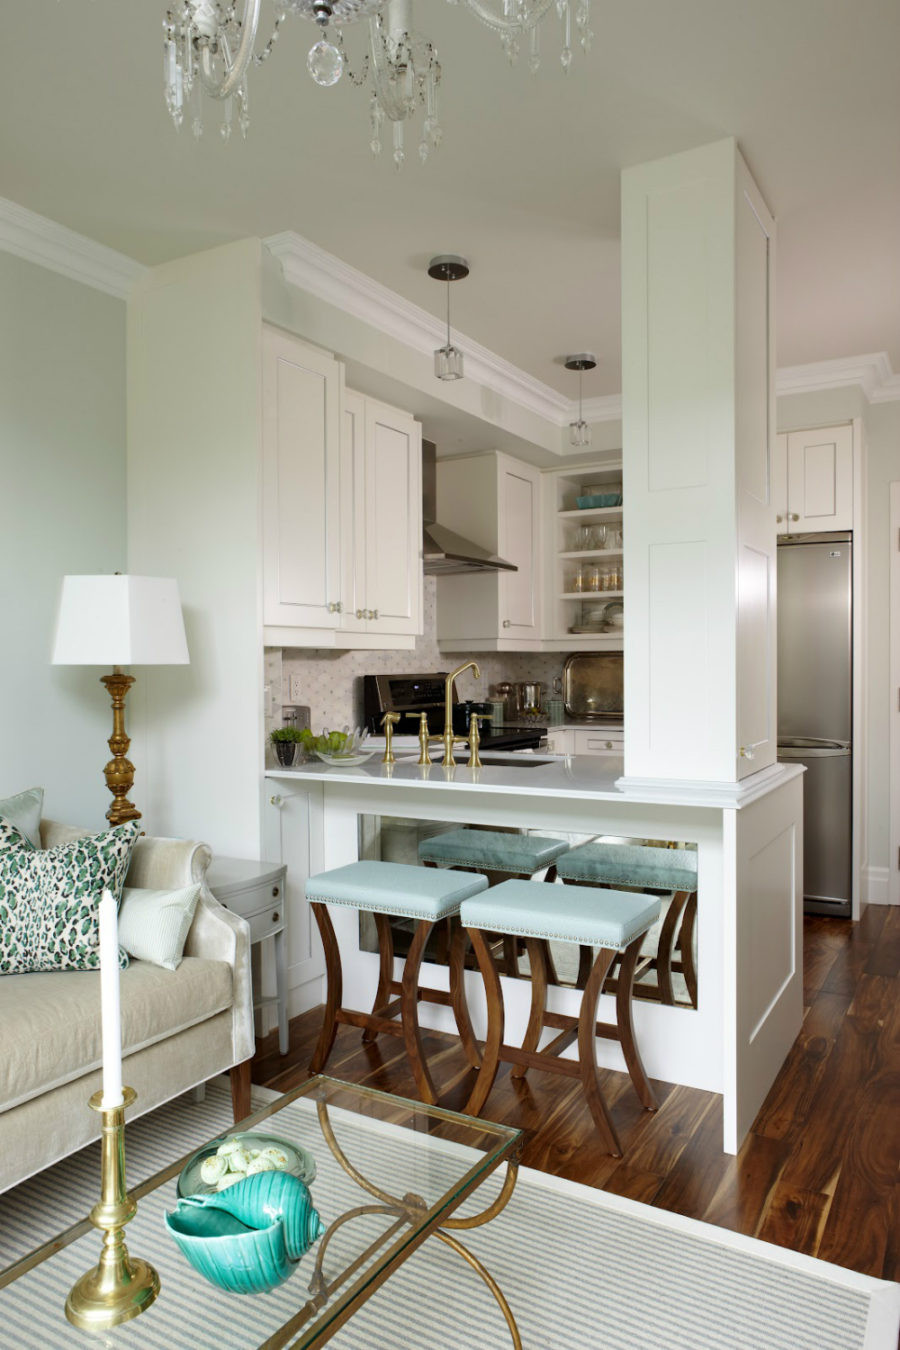 Small Kitchen With Peninsula
 Kitchen Peninsula Designs That Make Cook Rooms Look Amazing